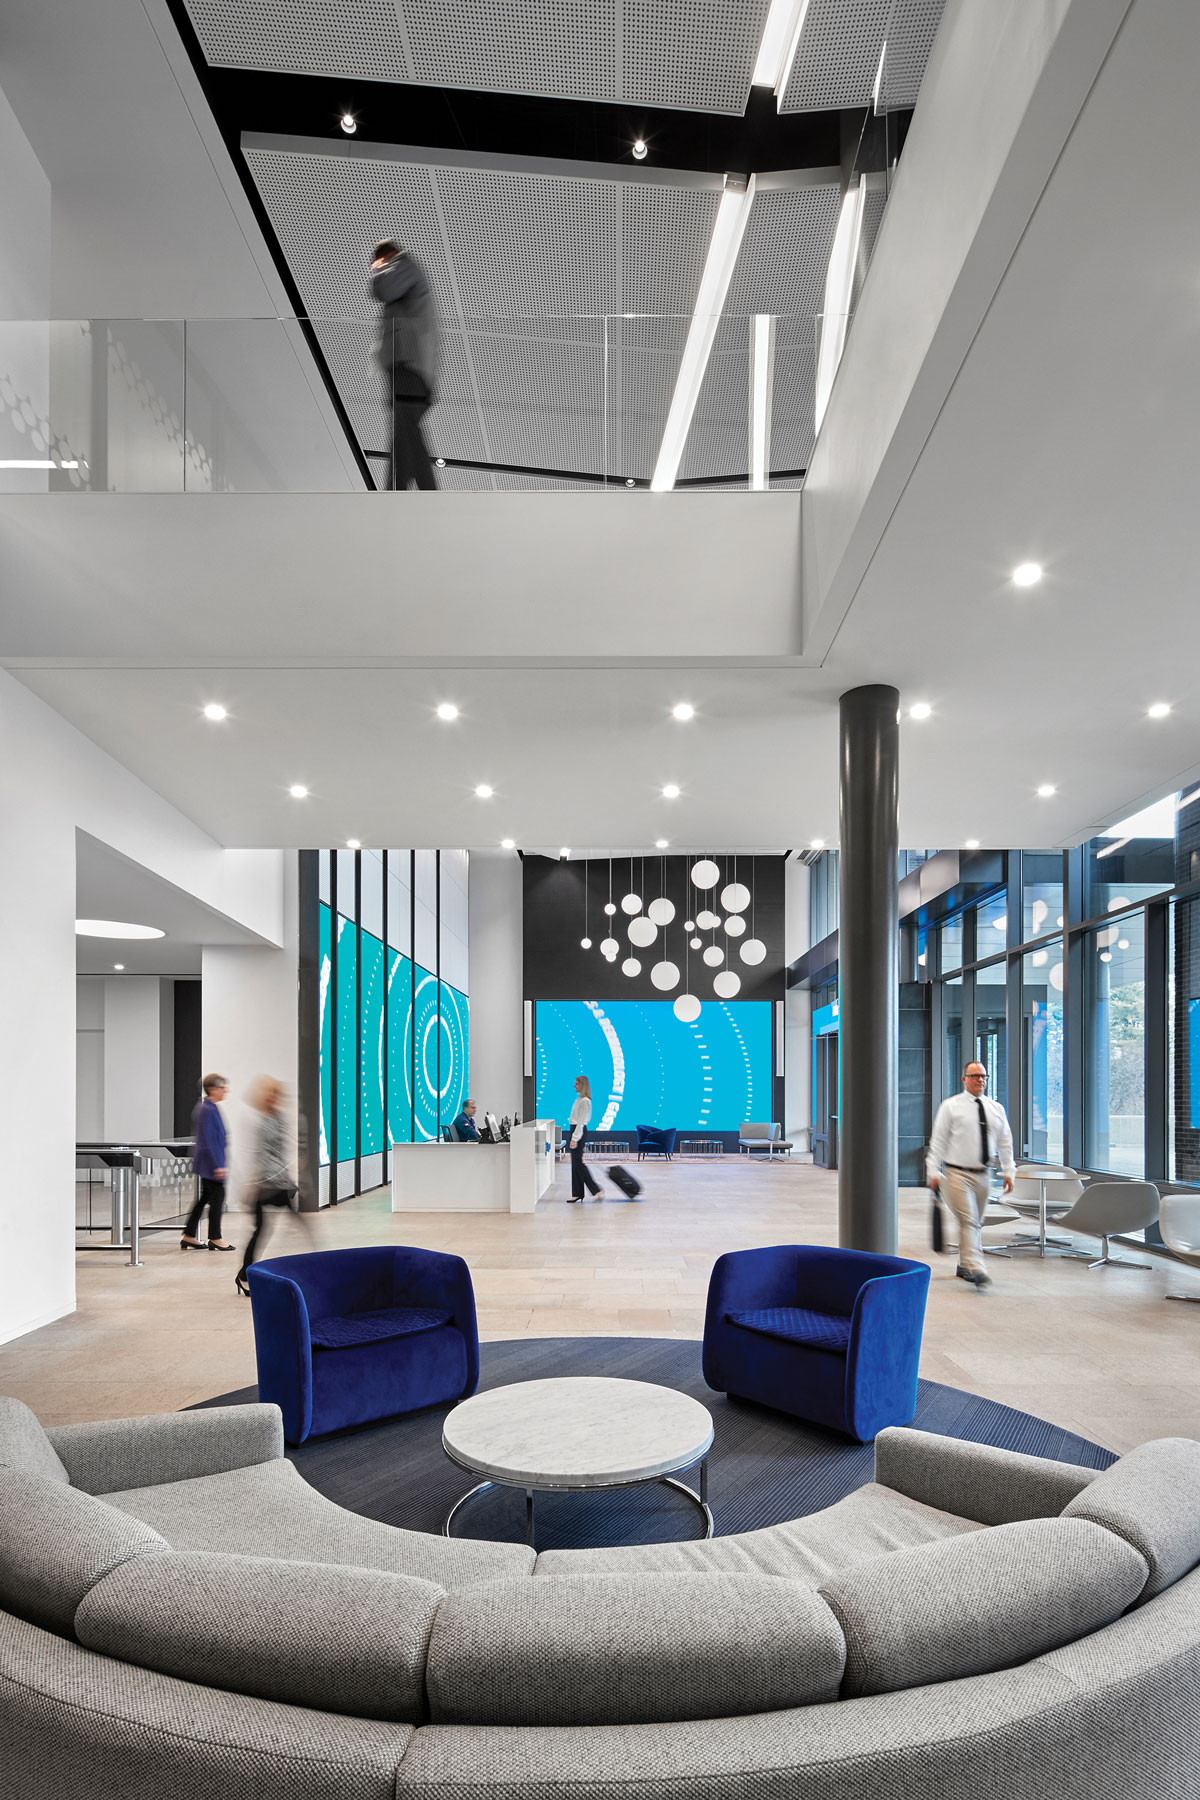 All Together Now: Allergan’s New NJ Headquarters - Structure Tone